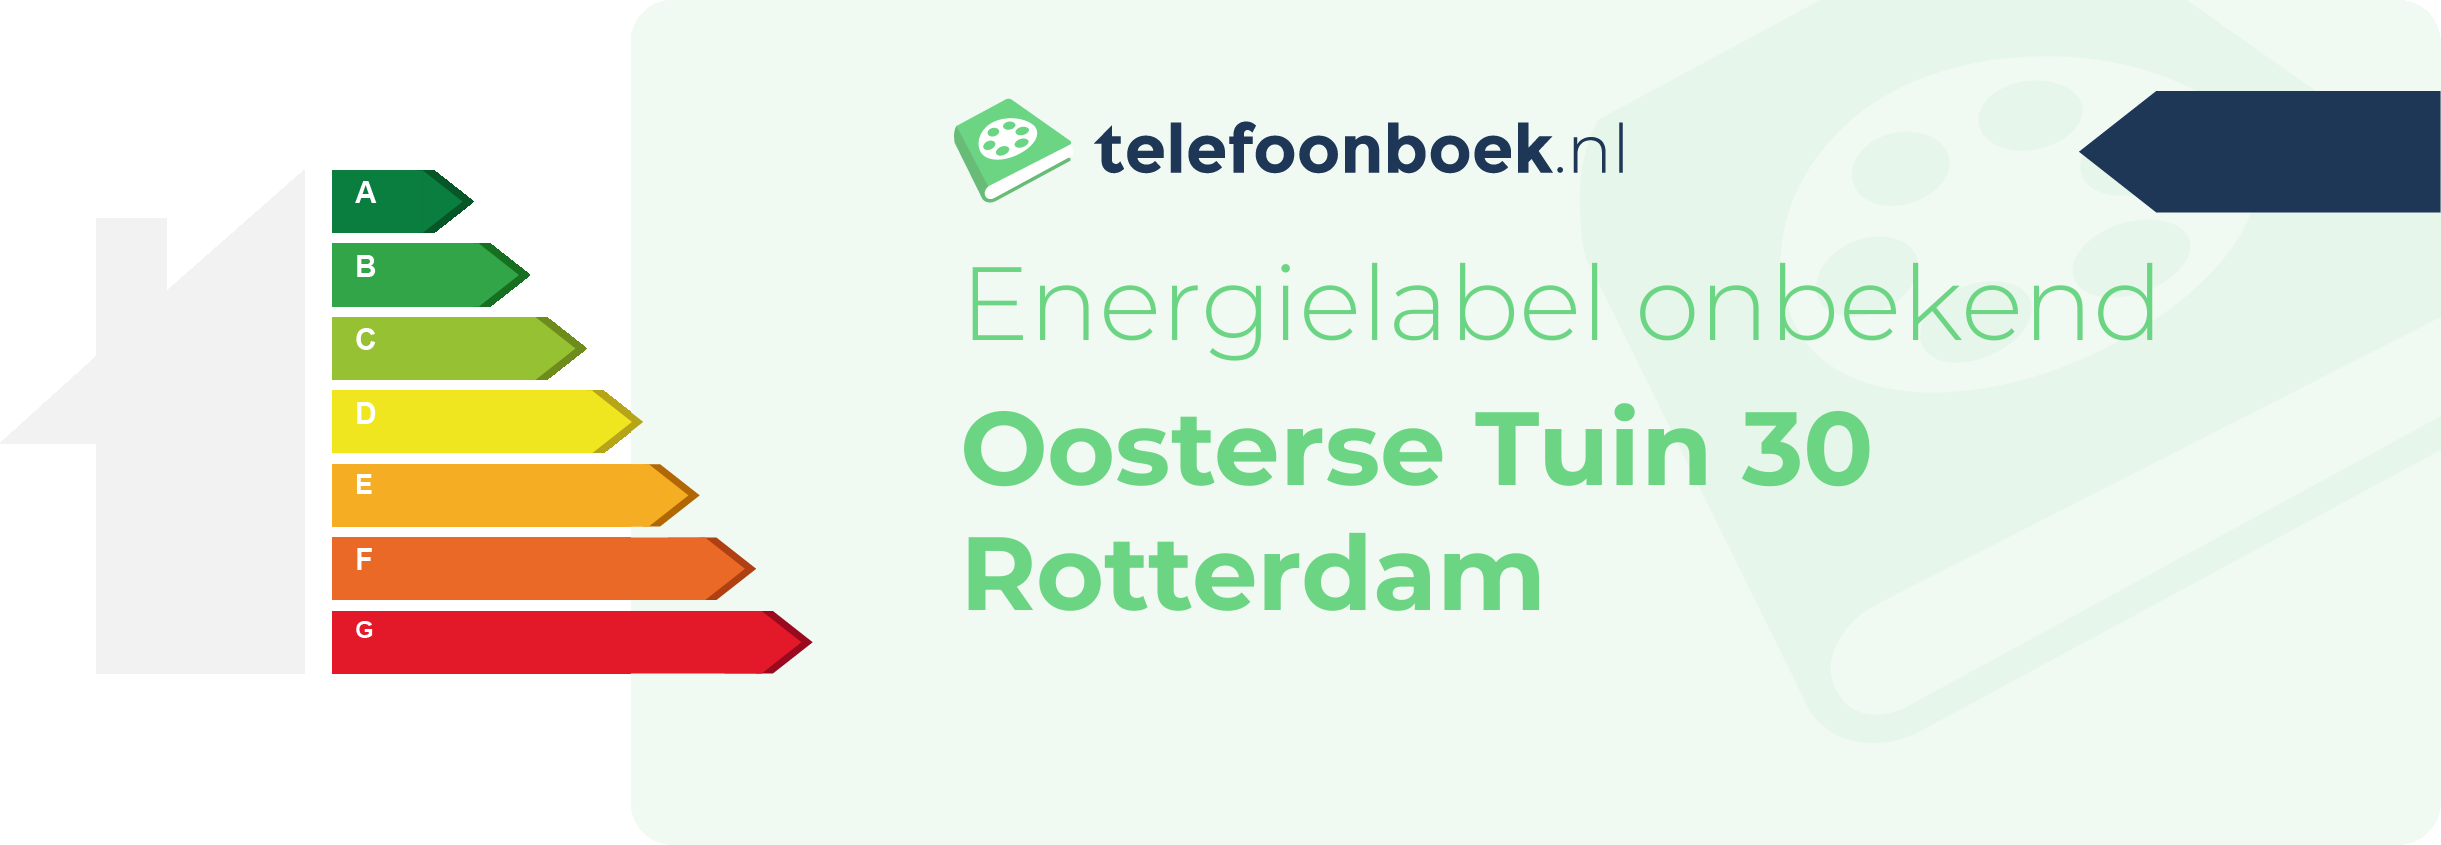 Energielabel Oosterse Tuin 30 Rotterdam